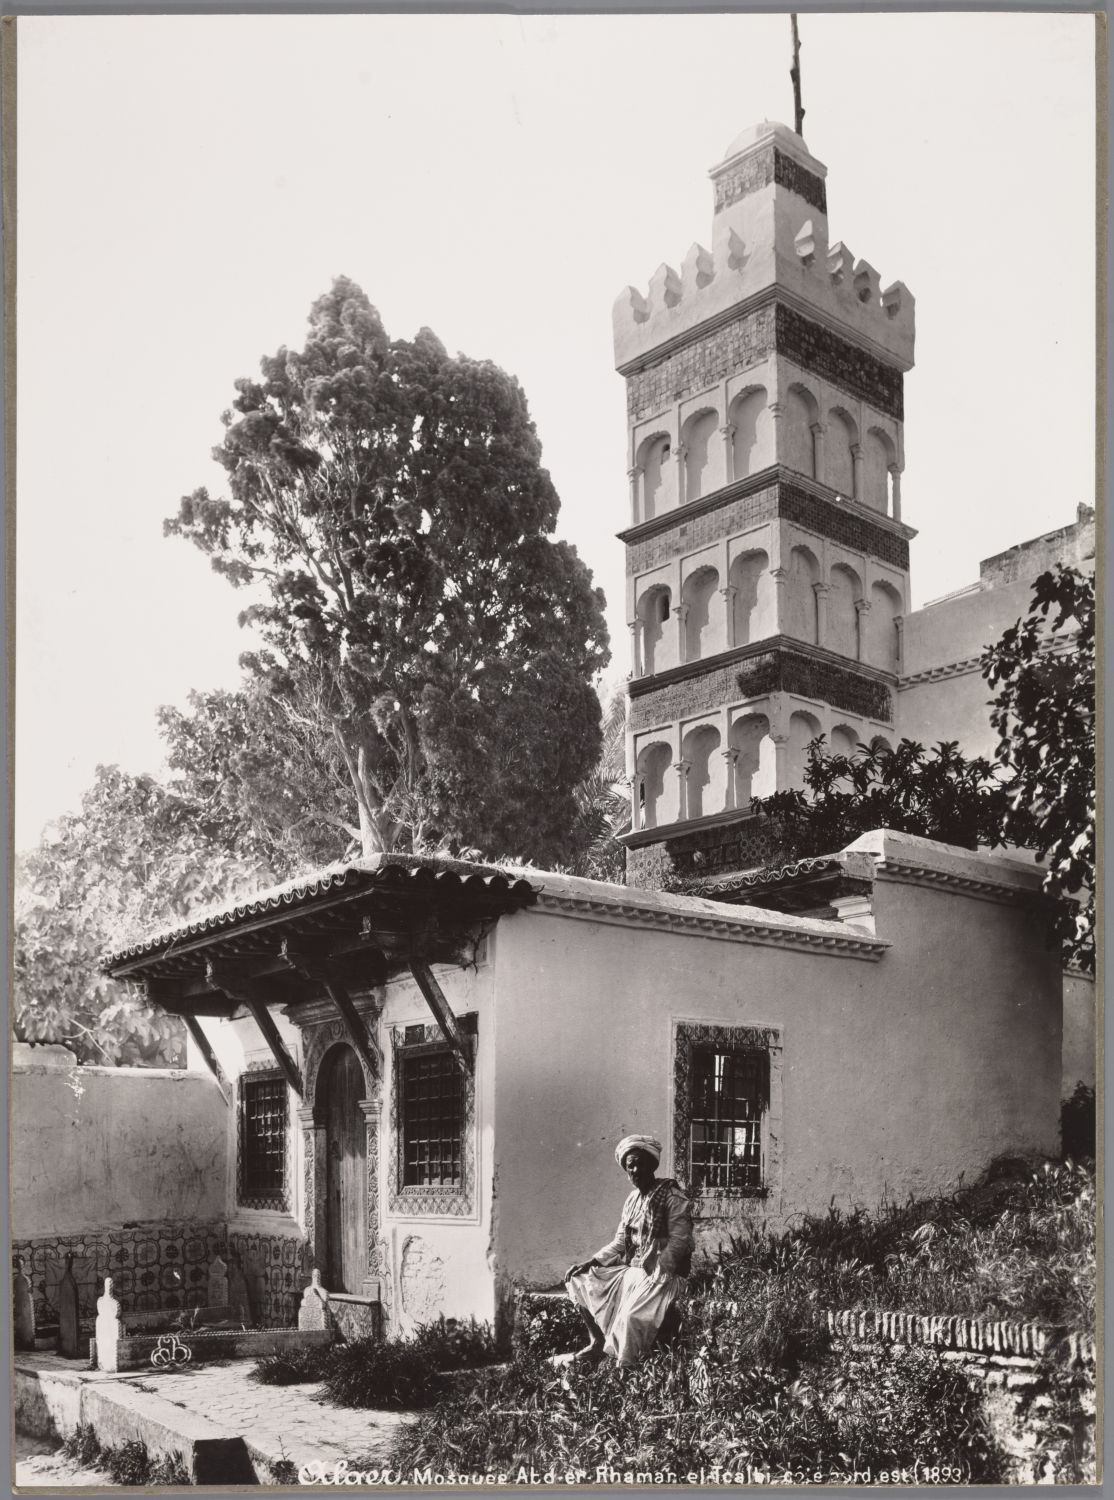 Man sitting in the garden by the mosque